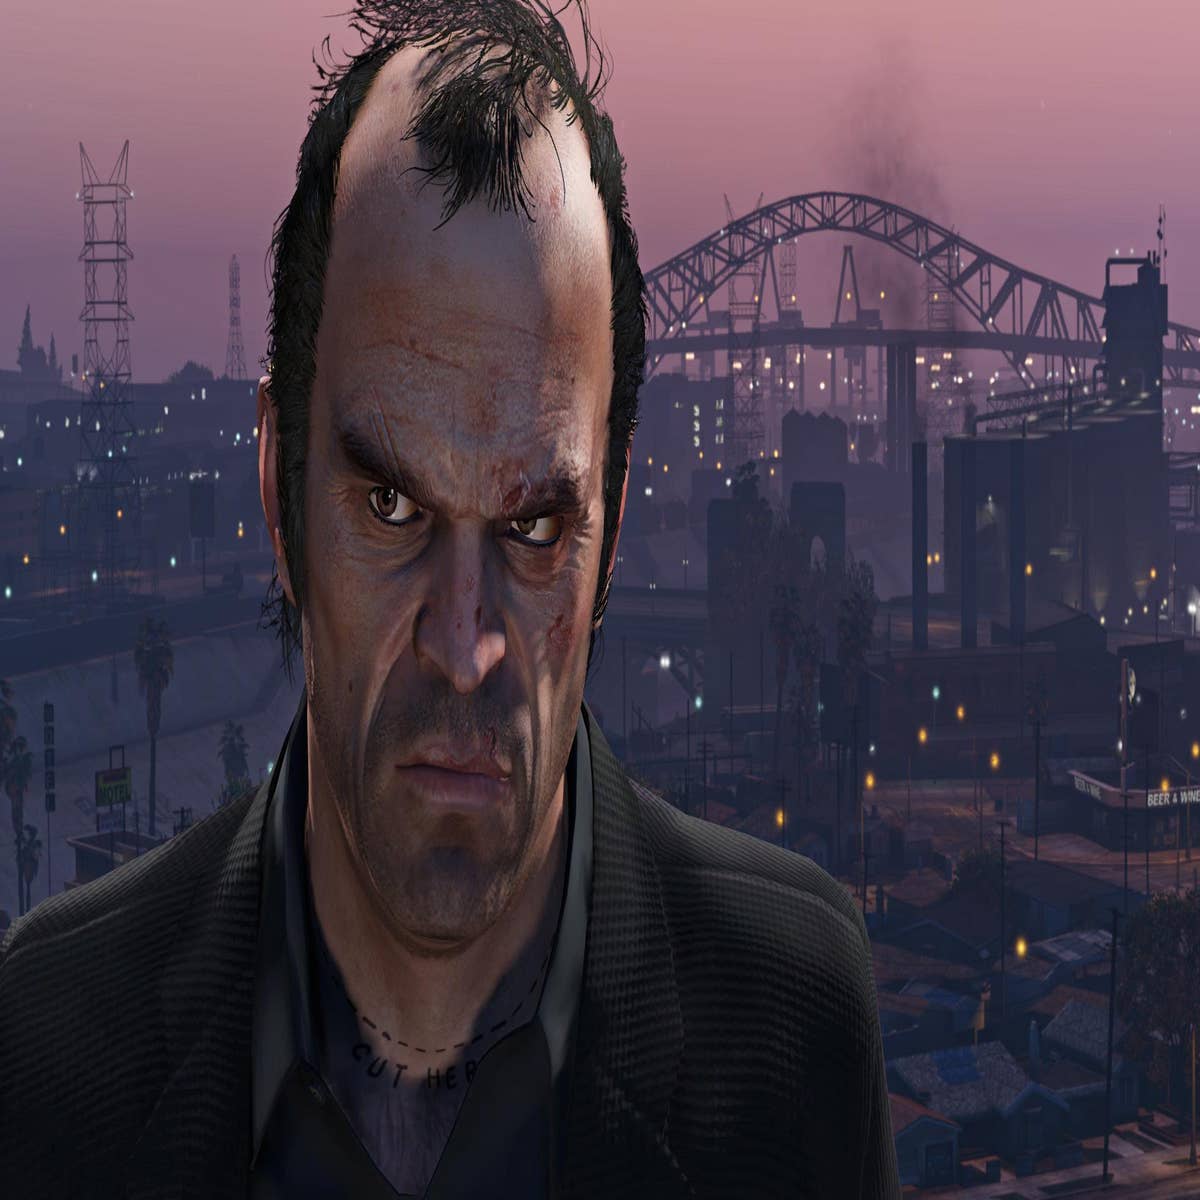 We were always going to bring GTA 5 to PC, says Rockstar